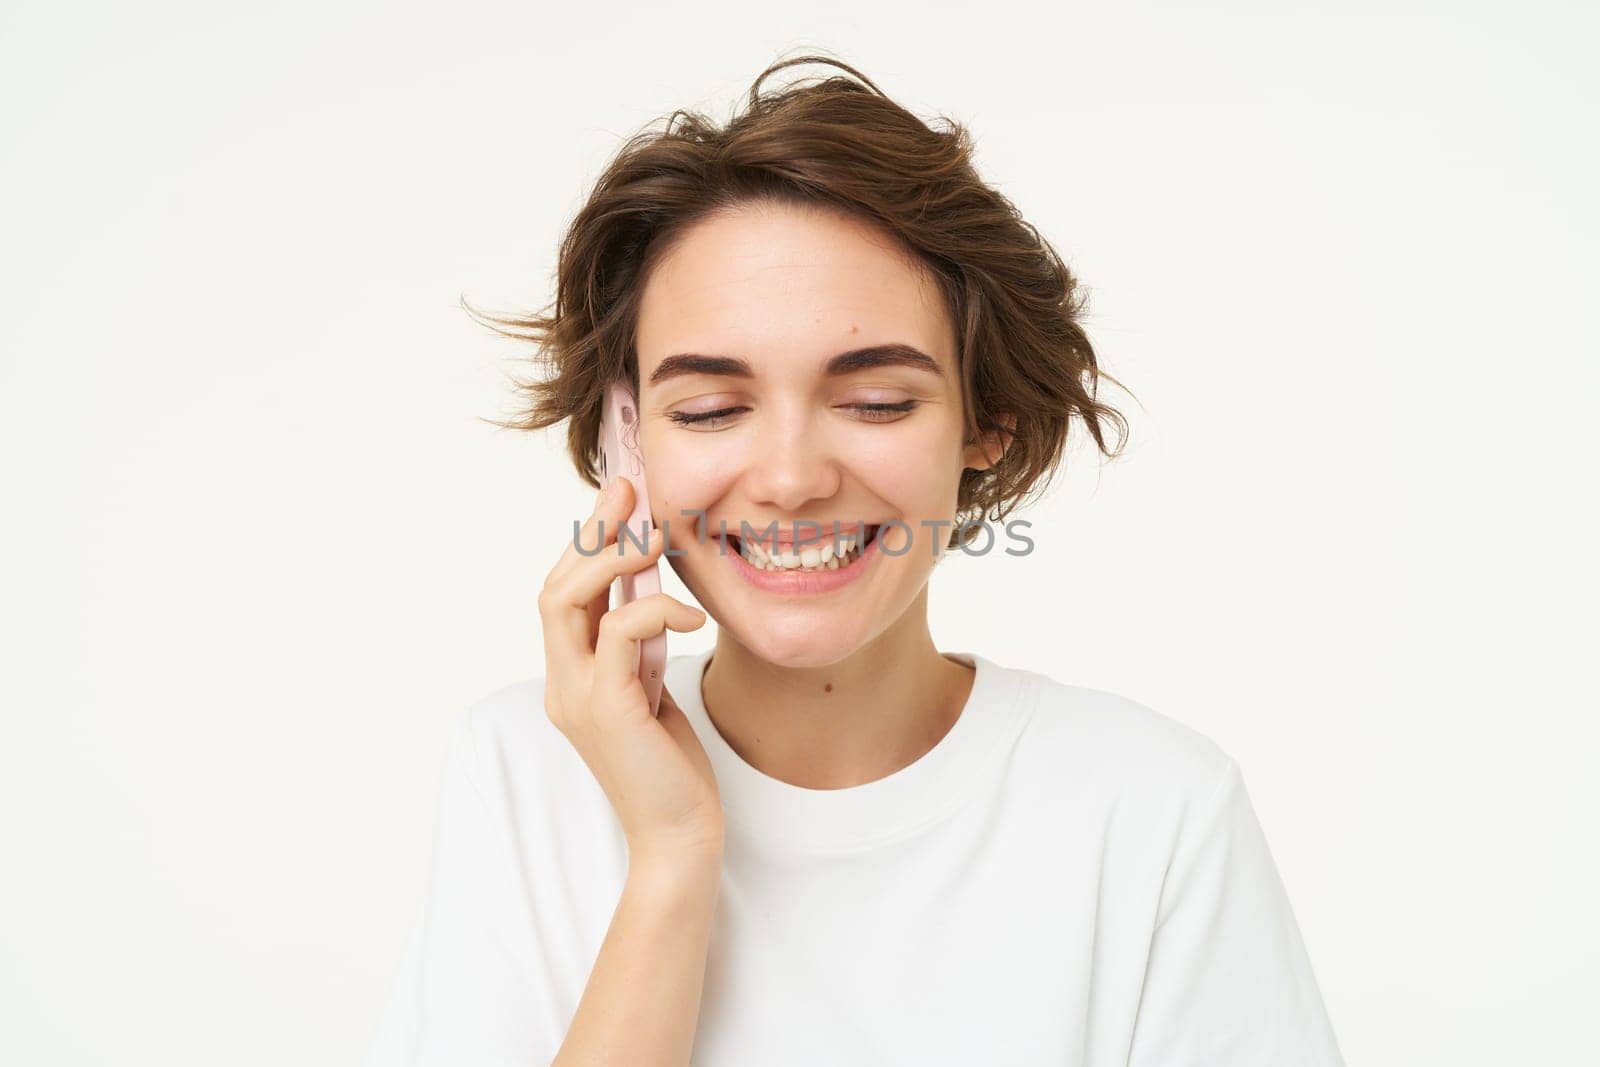 Image of smiling, brunette woman calling someone, talking on mobile phone, answer telephone call, standing over white background.